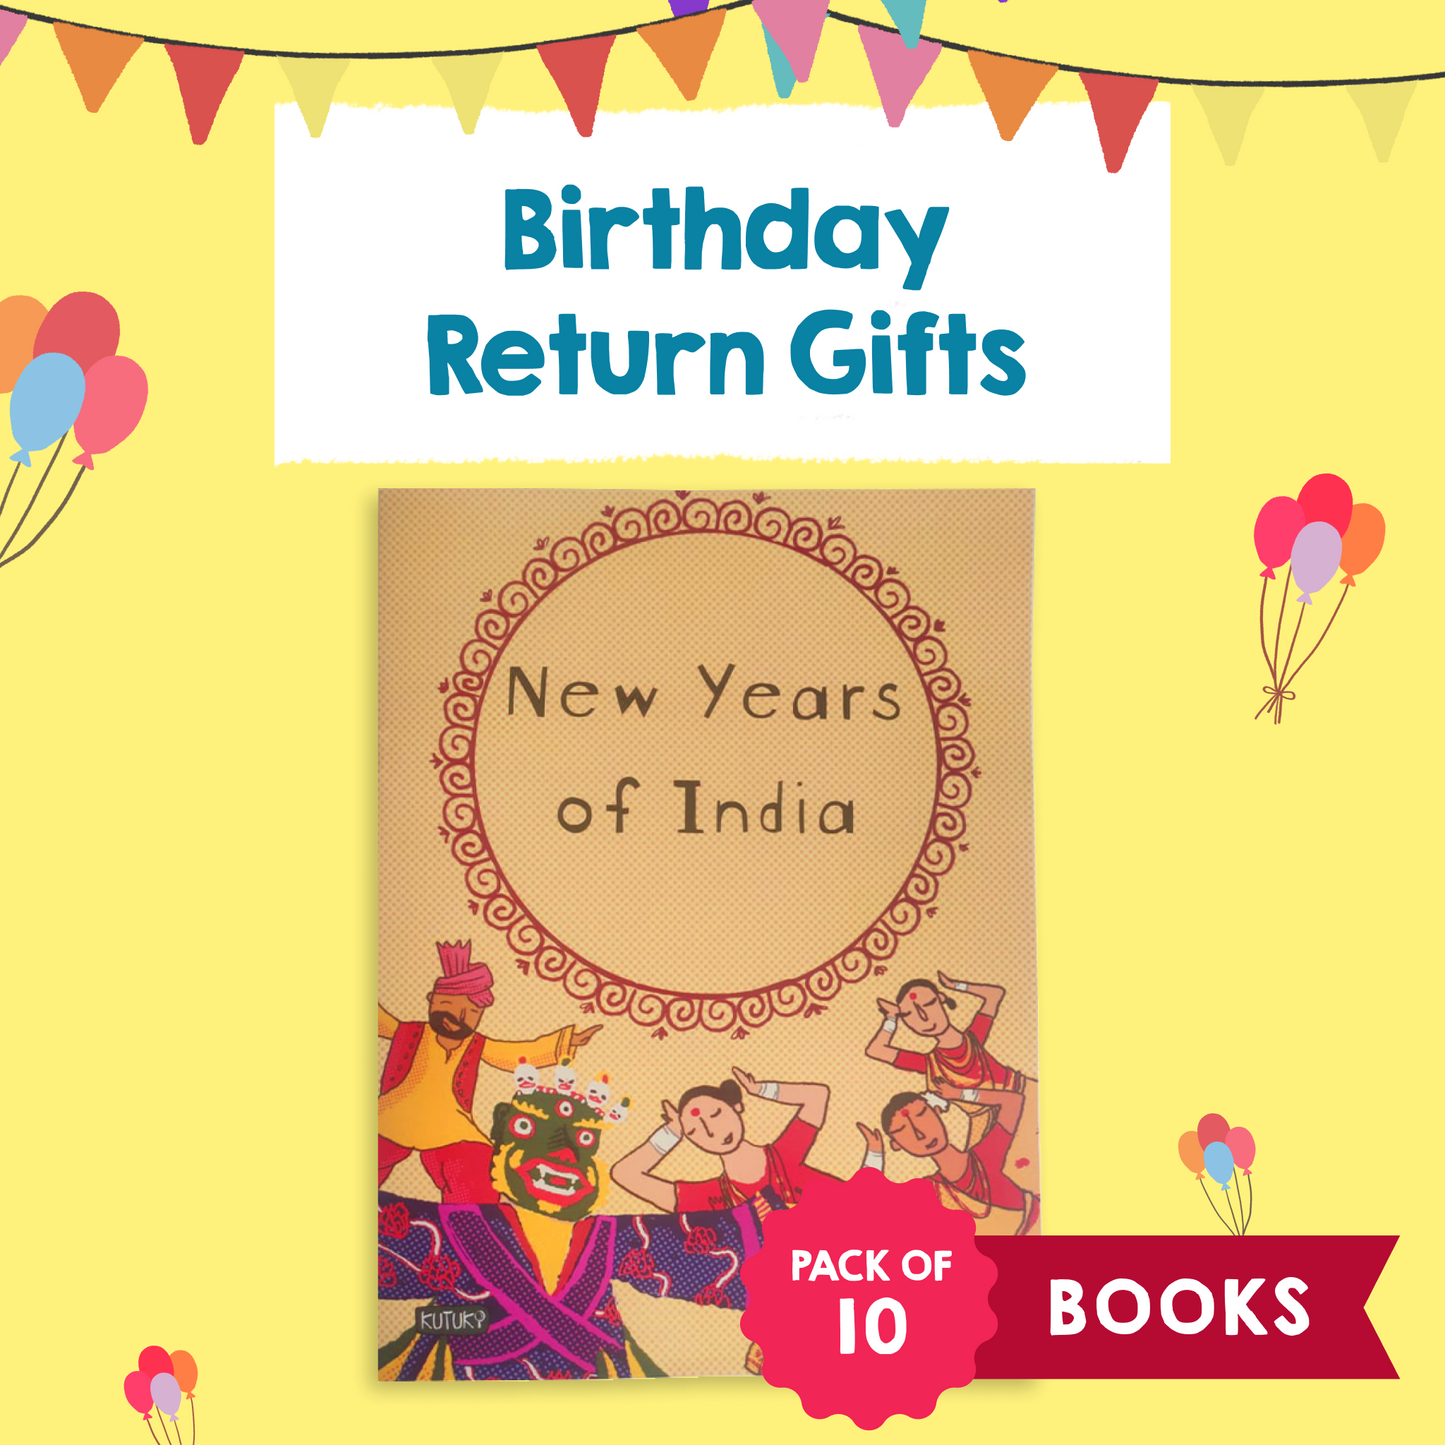 New Years of India Picture Books (Pack of 10 Books)